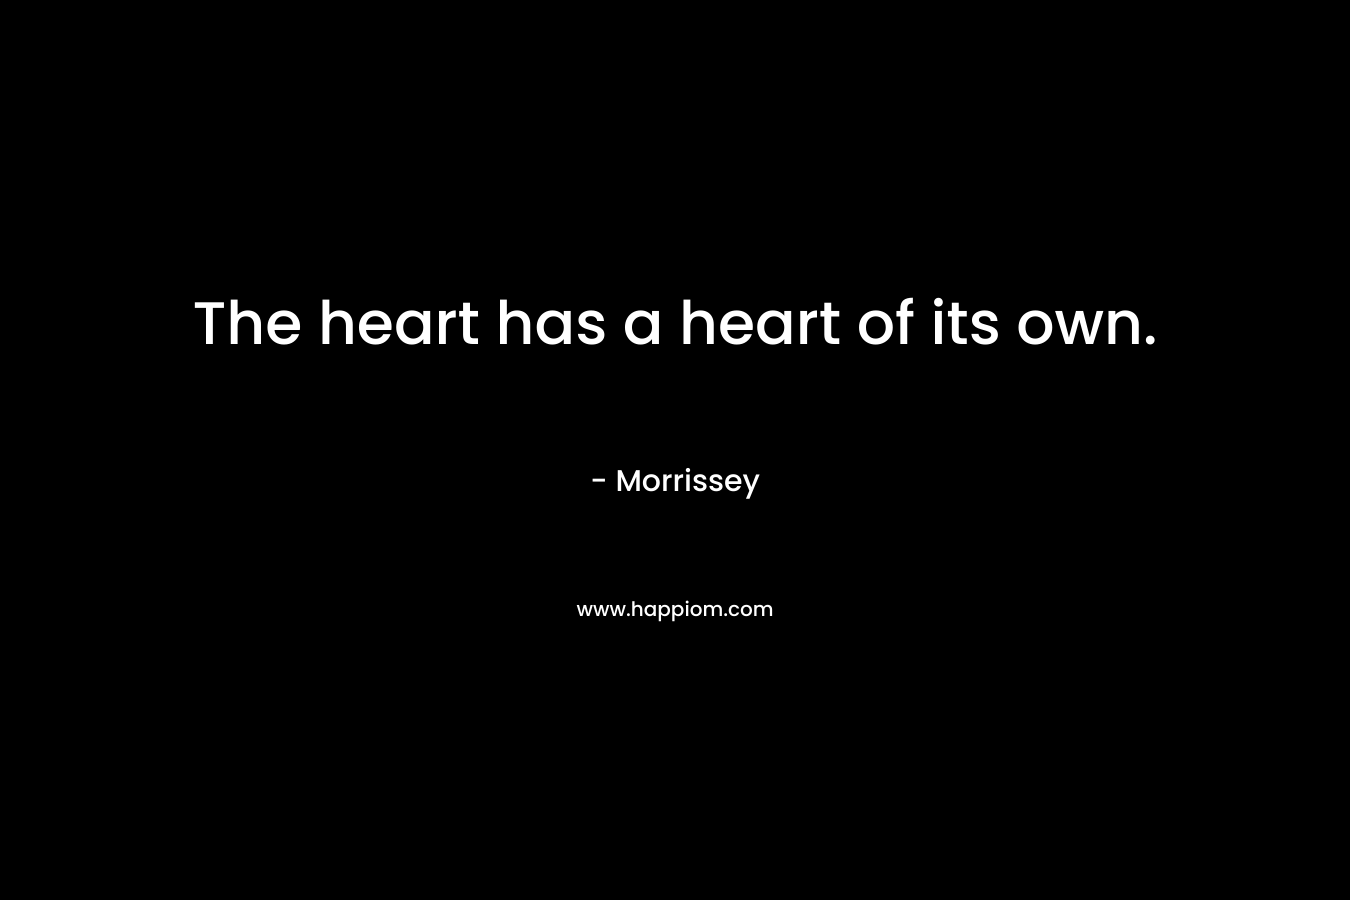 The heart has a heart of its own.